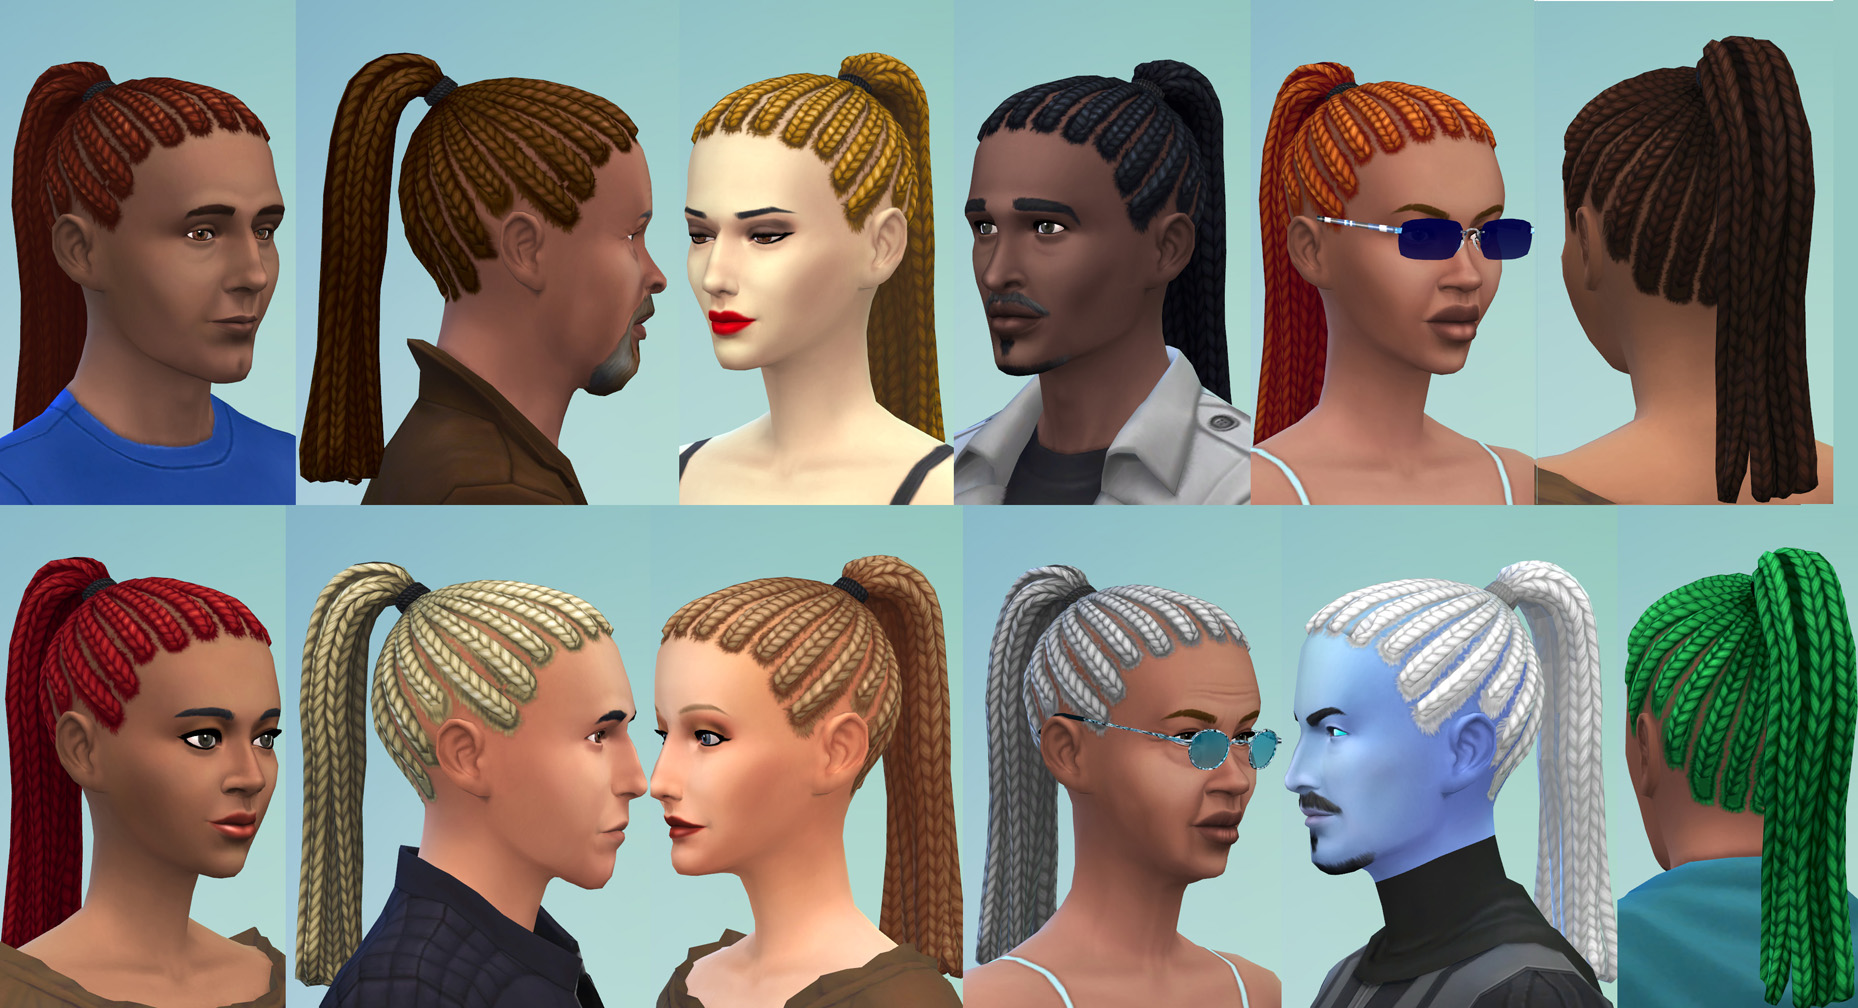 Ponytail hairstyles fallout 4 фото 67